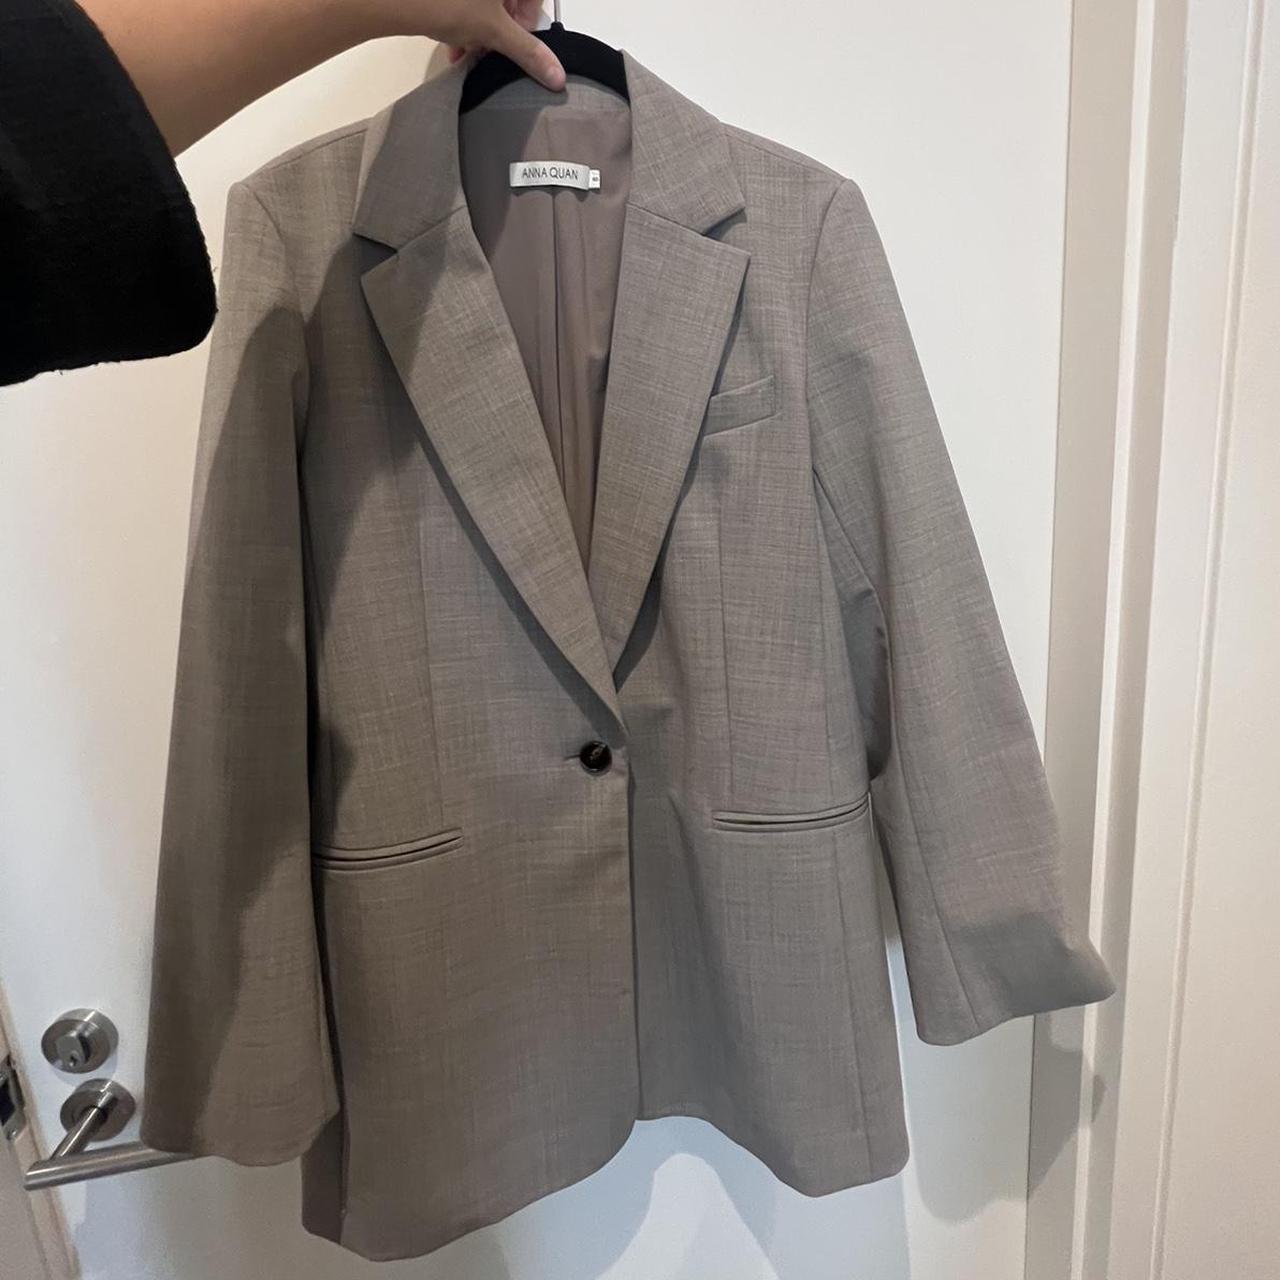 Anna Quan grey blazer (oversized fit) Bought from... - Depop